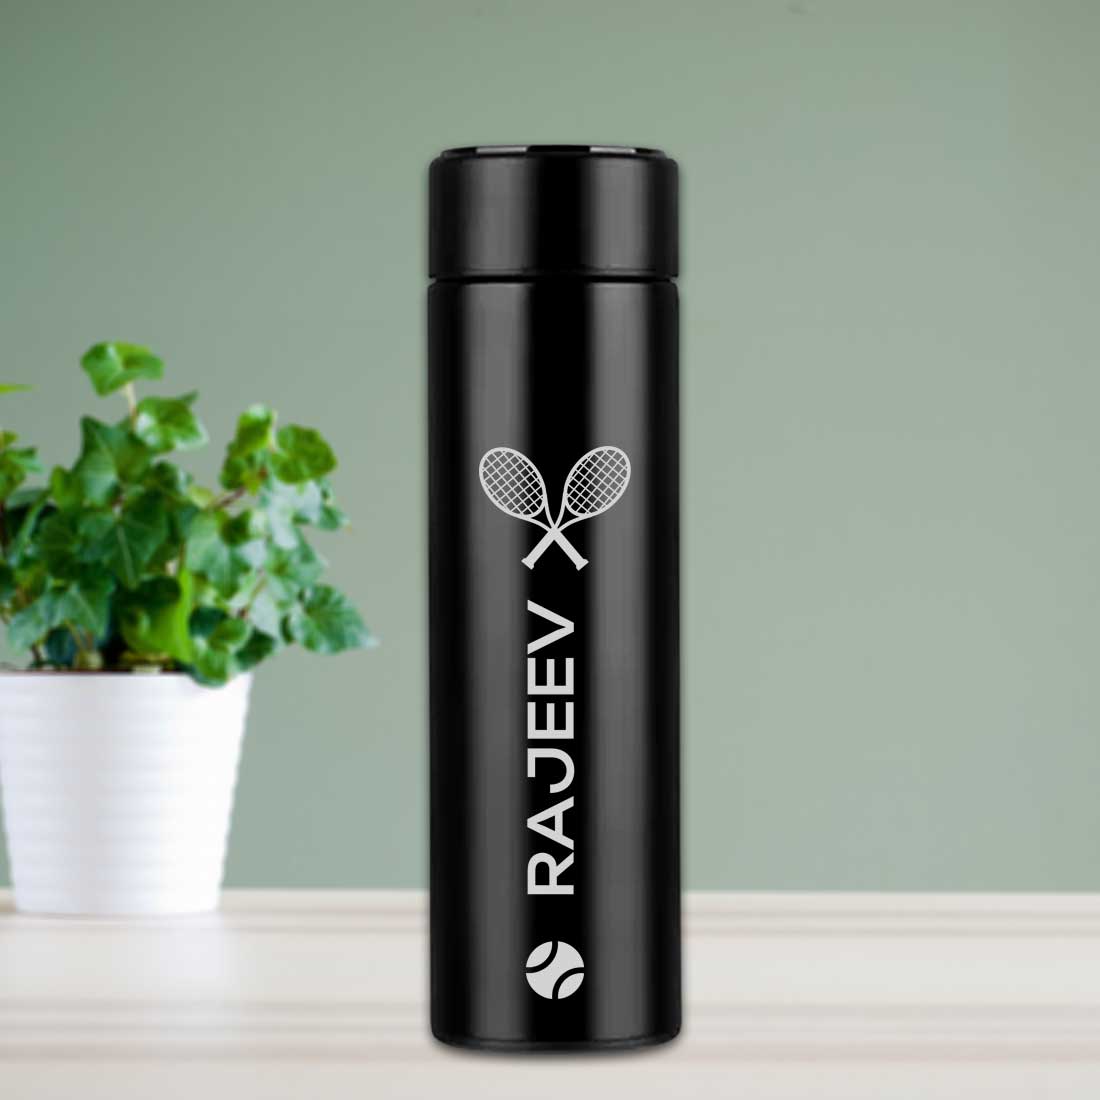 Custom Stainless Steel Thermos Coffee Flask with LED Display - Racket